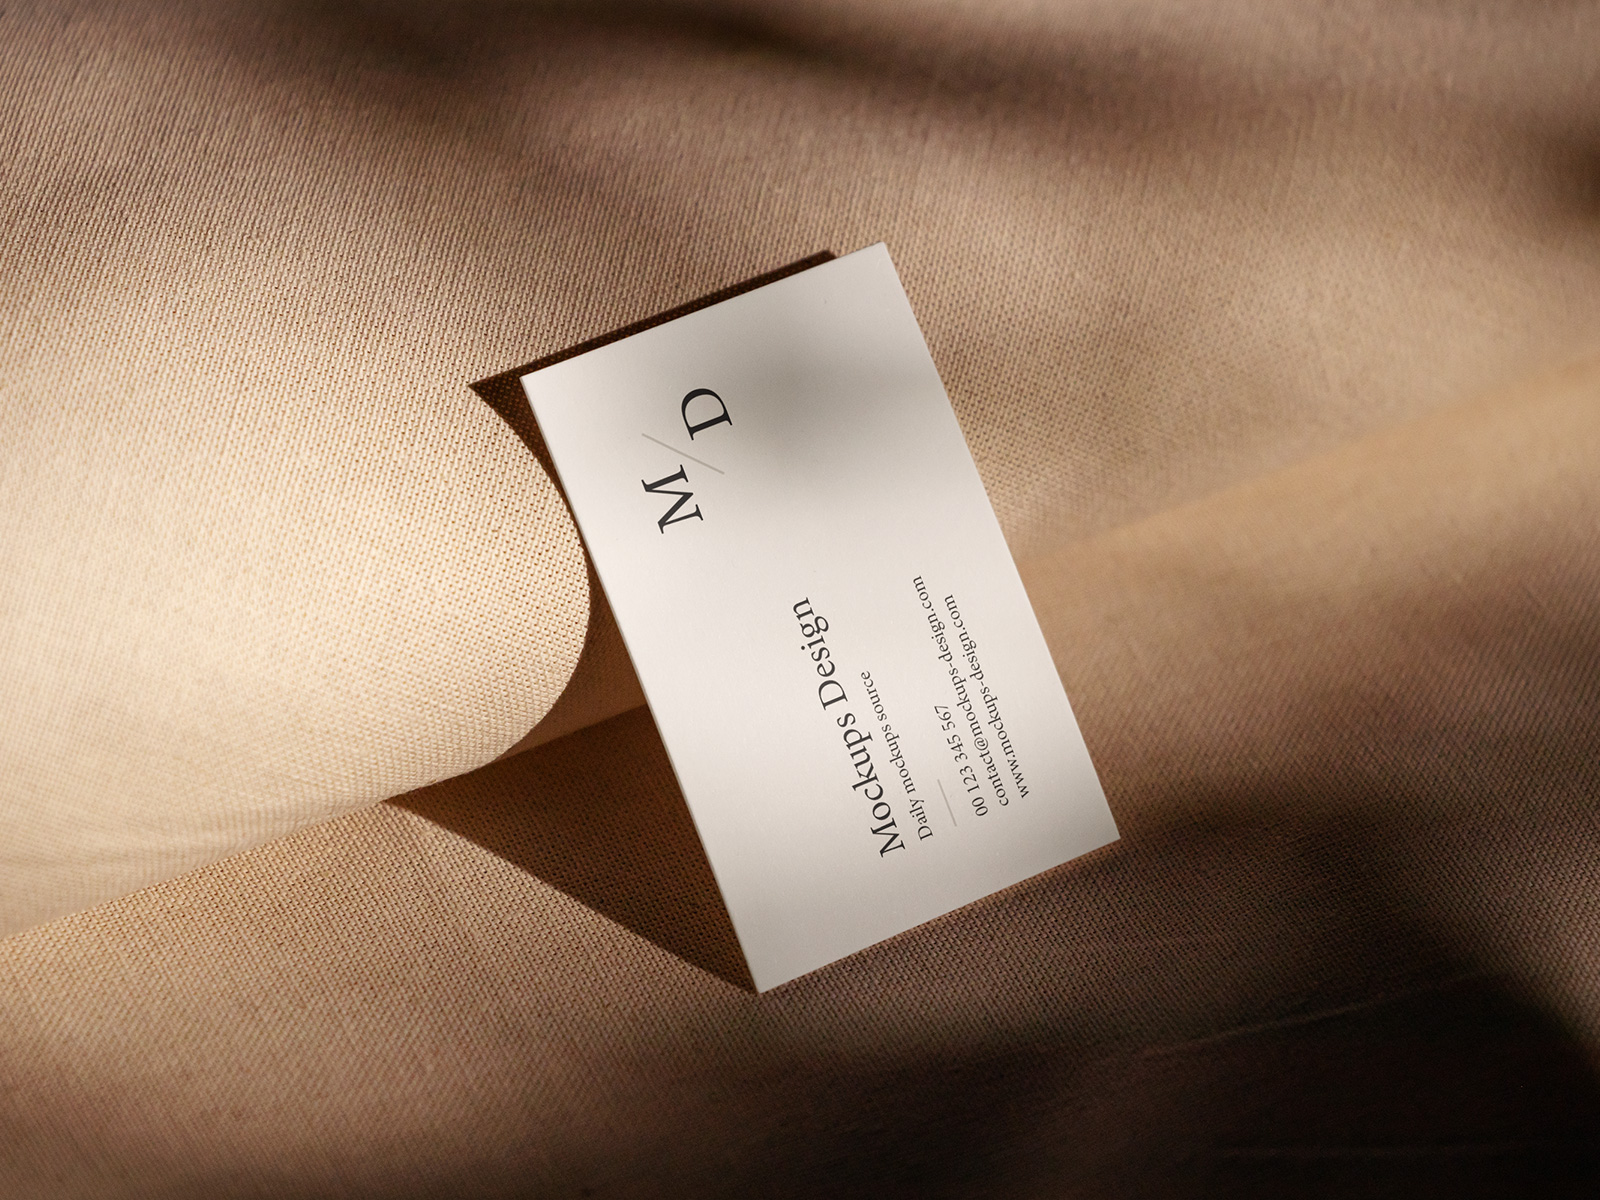 Realistic Business Card Free Mockup on a Fabric